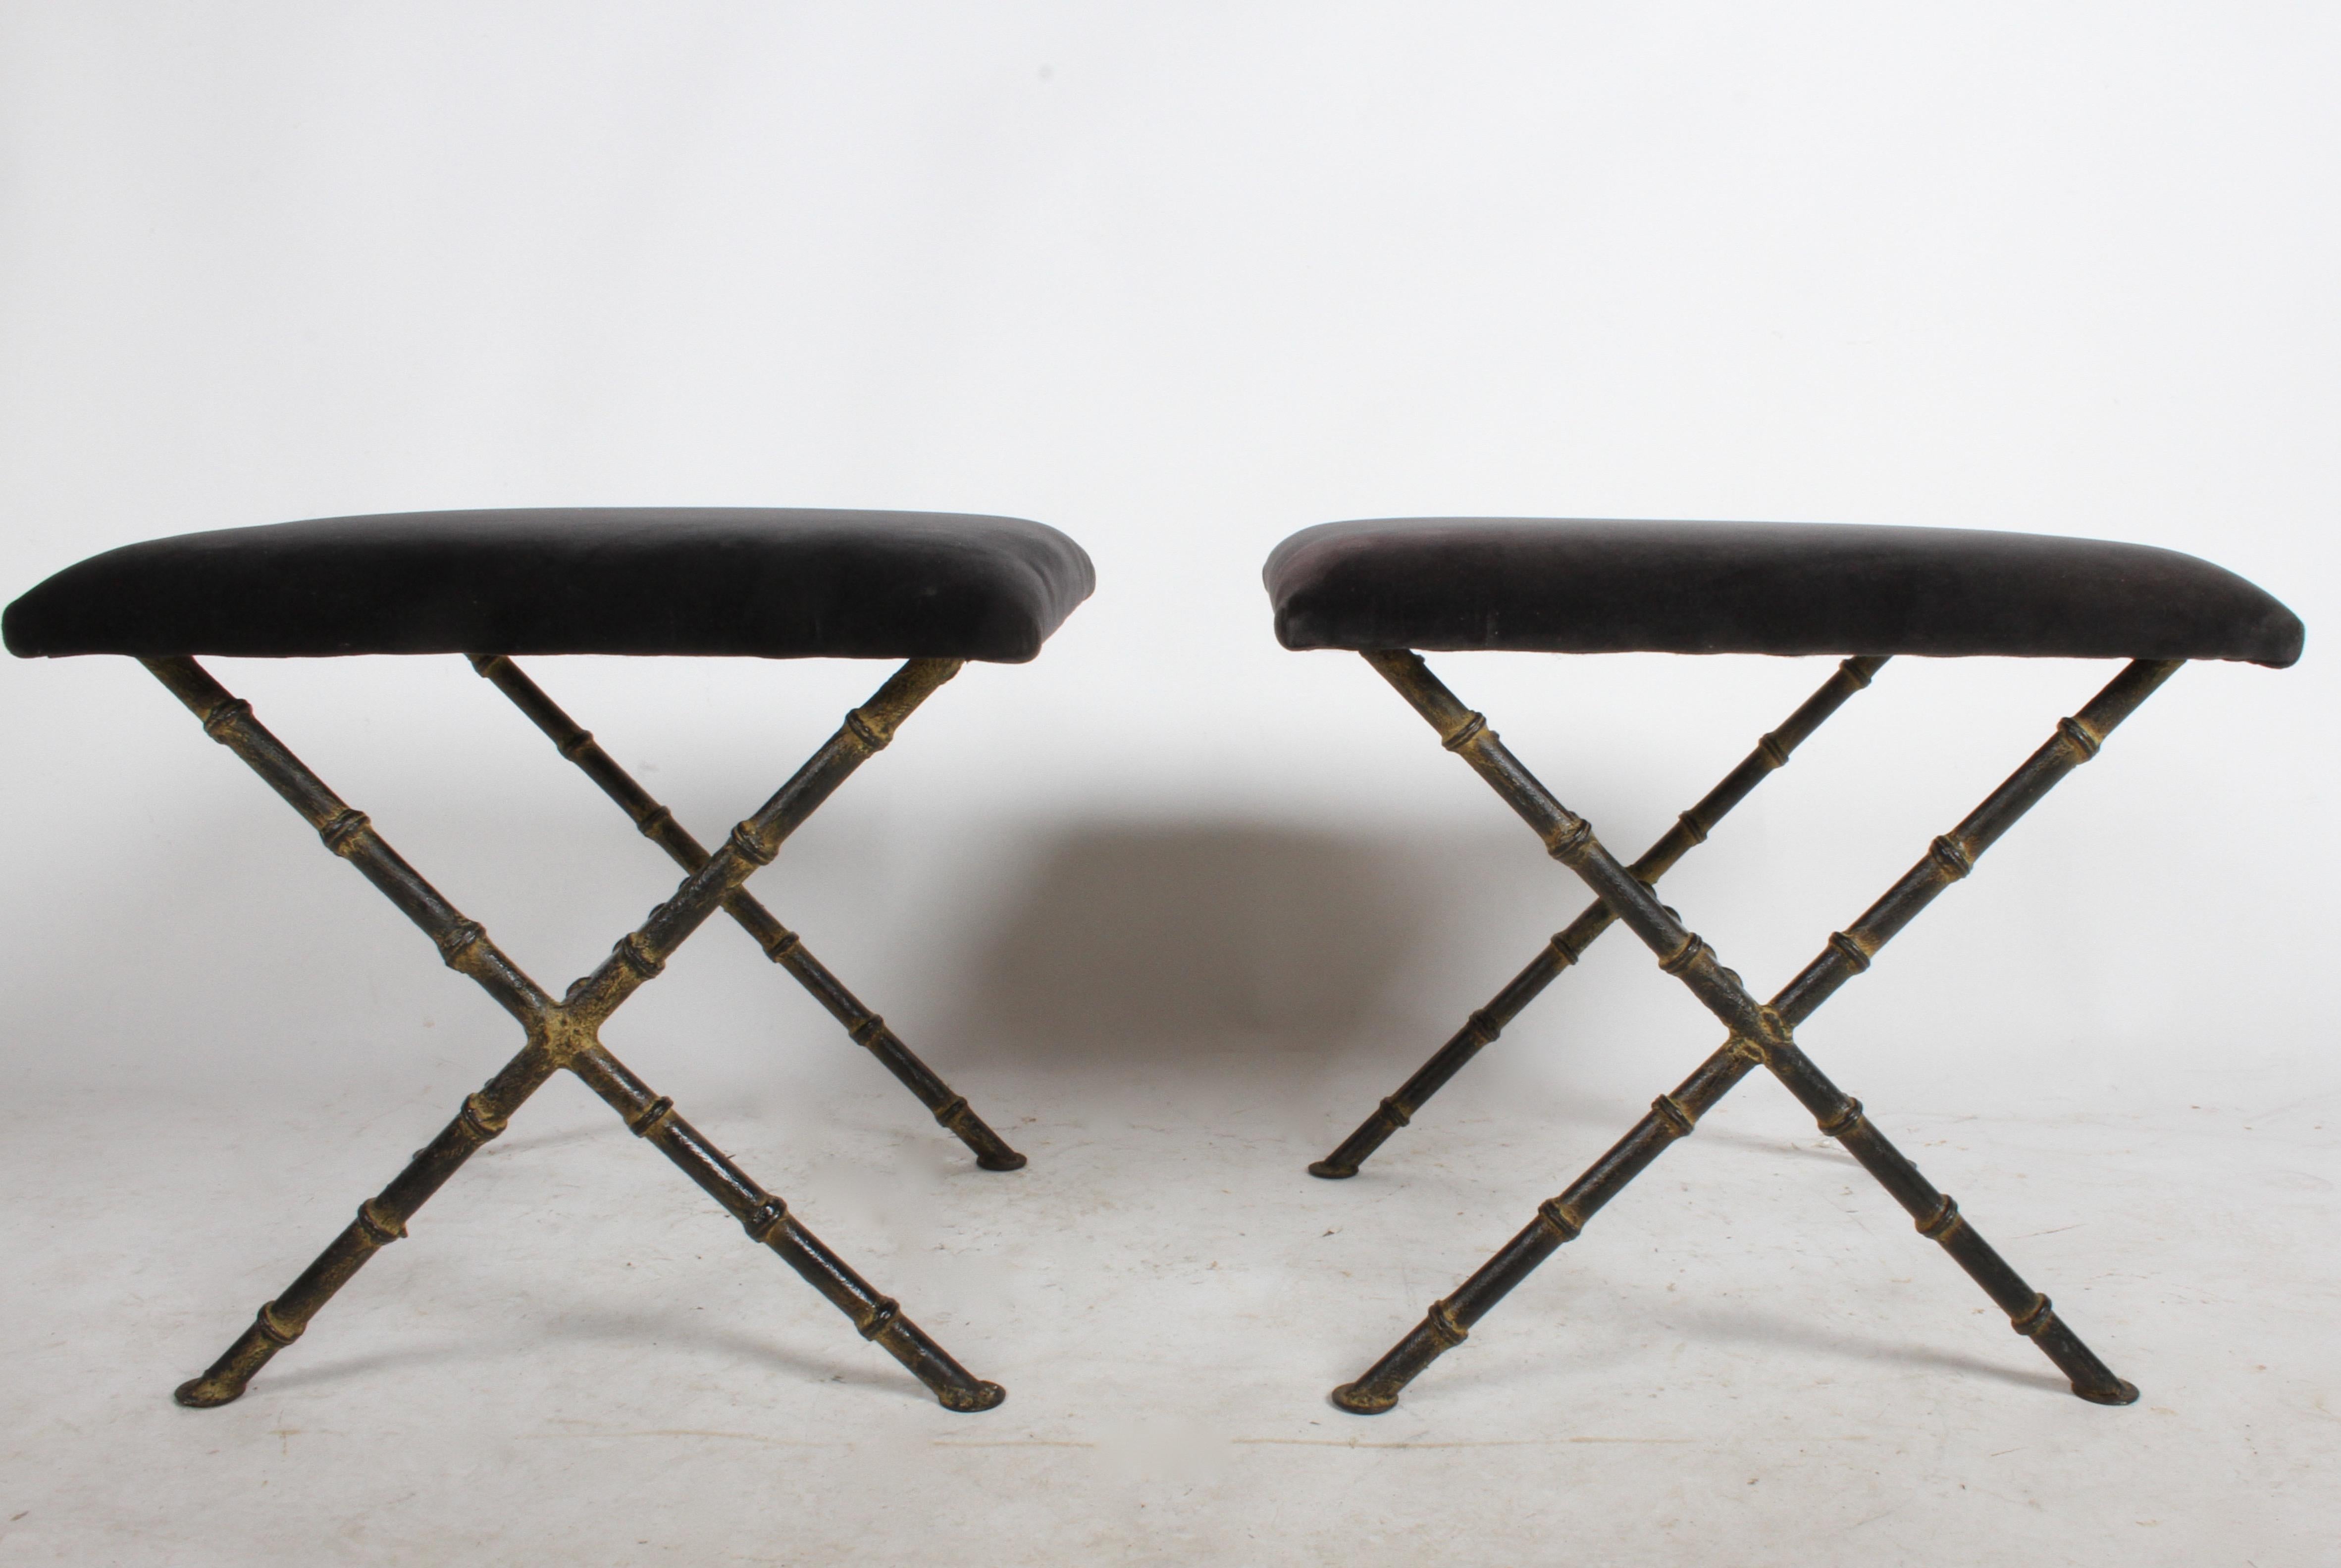 Cold-Painted Pair of Hollywood Regency Faux Bamboo X-Base Stools, Benches or Ottomans